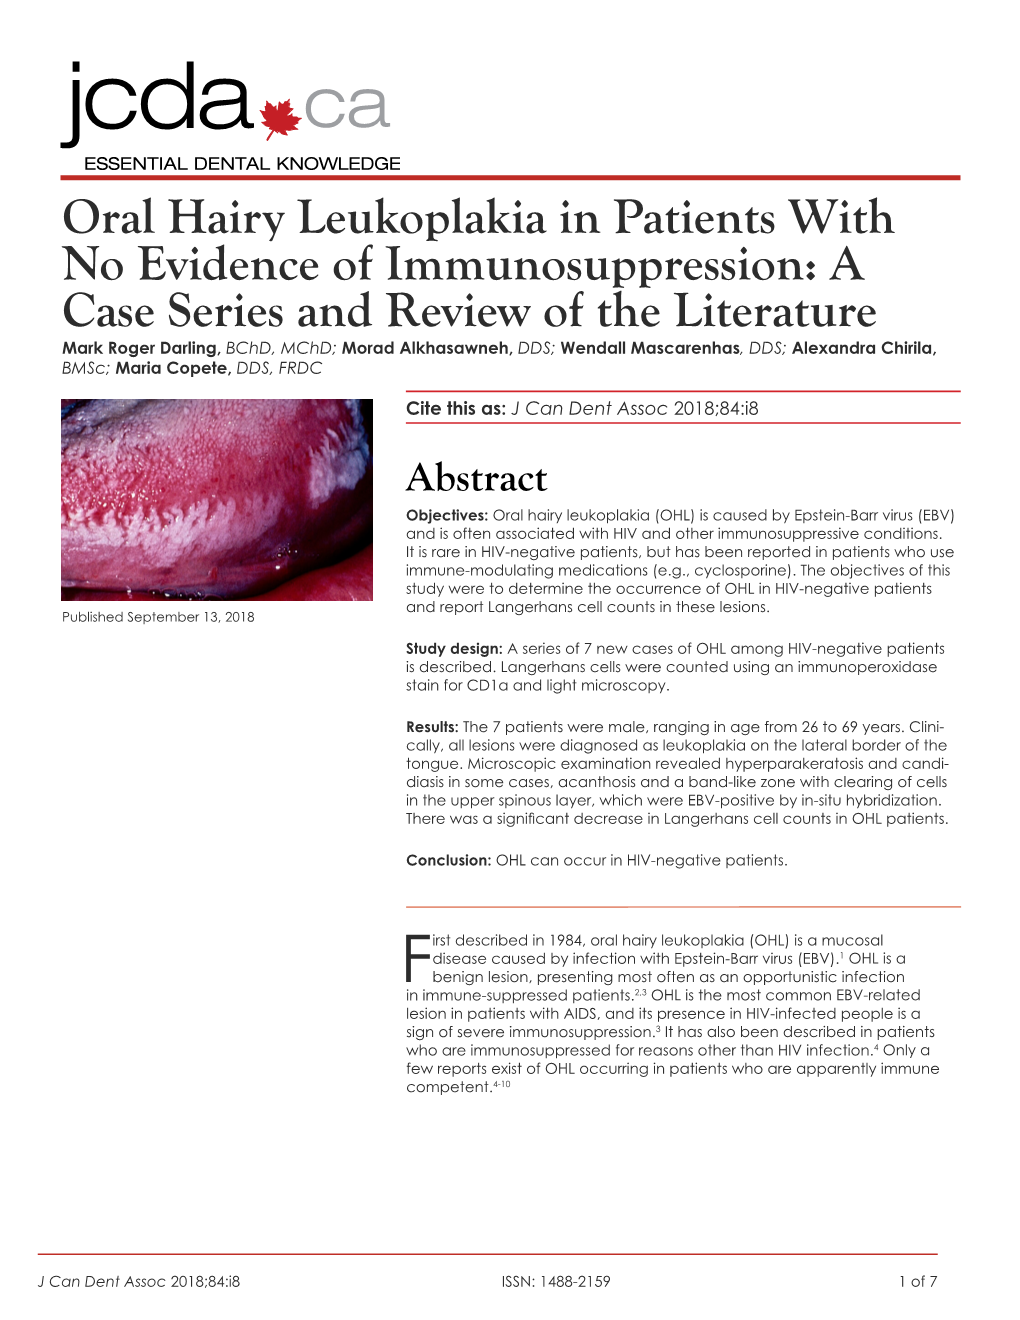 Oral Hairy Leukoplakia in Patients with No Evidence Of